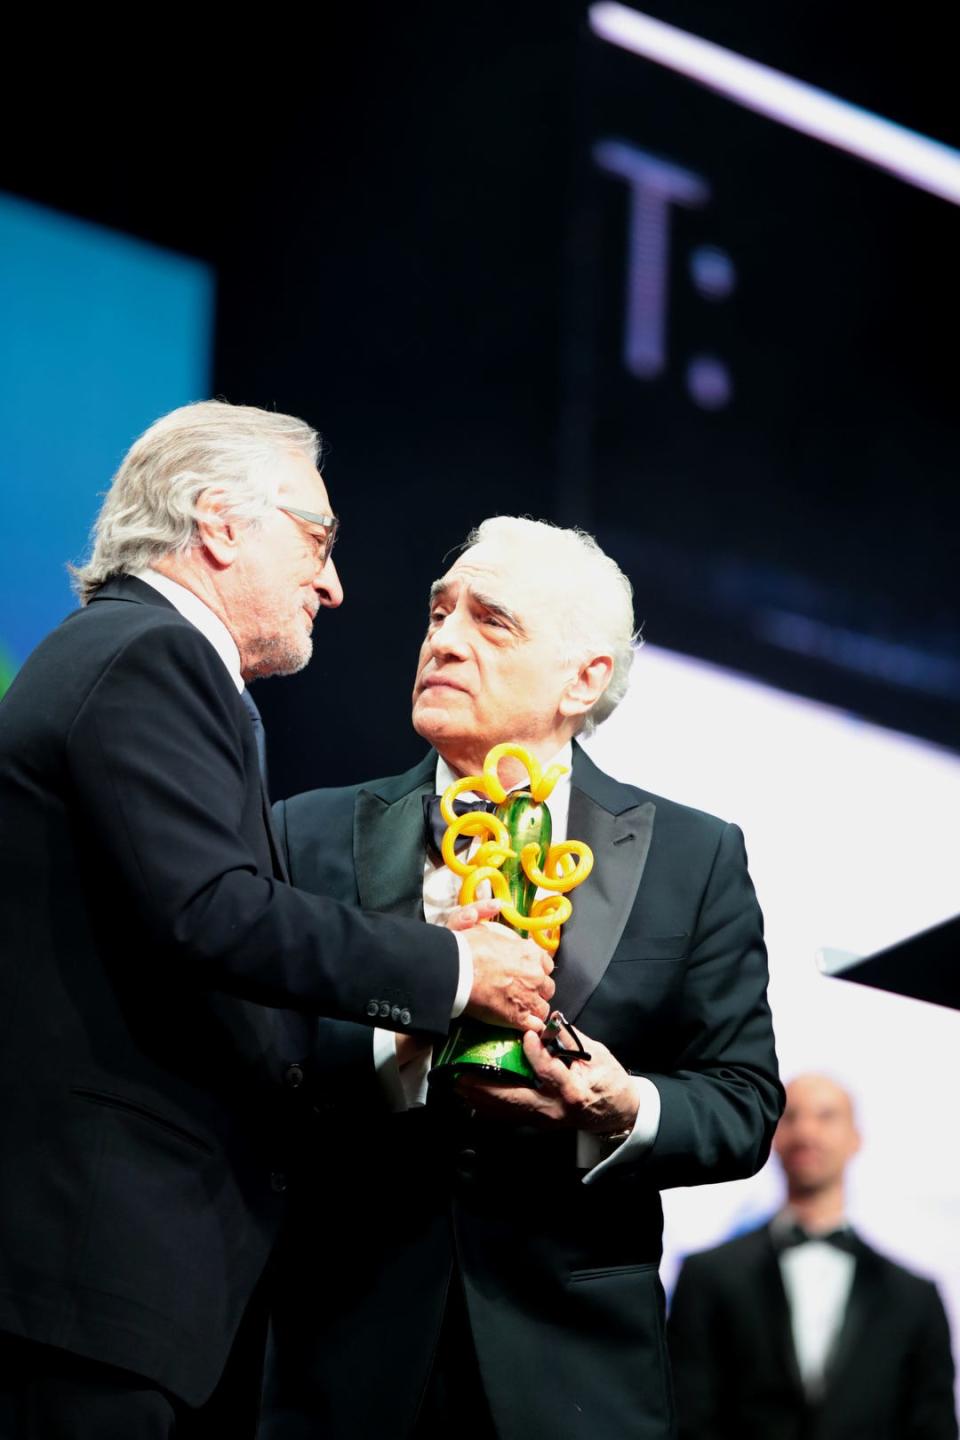 Martin Scorsese receives the Sonny Bono Visionary Award from actor and longtime collaborator Robert De Niro on Jan. 2, 2020, during the Film Awards Gala at the 31st annual Palm Springs International Film Festival.